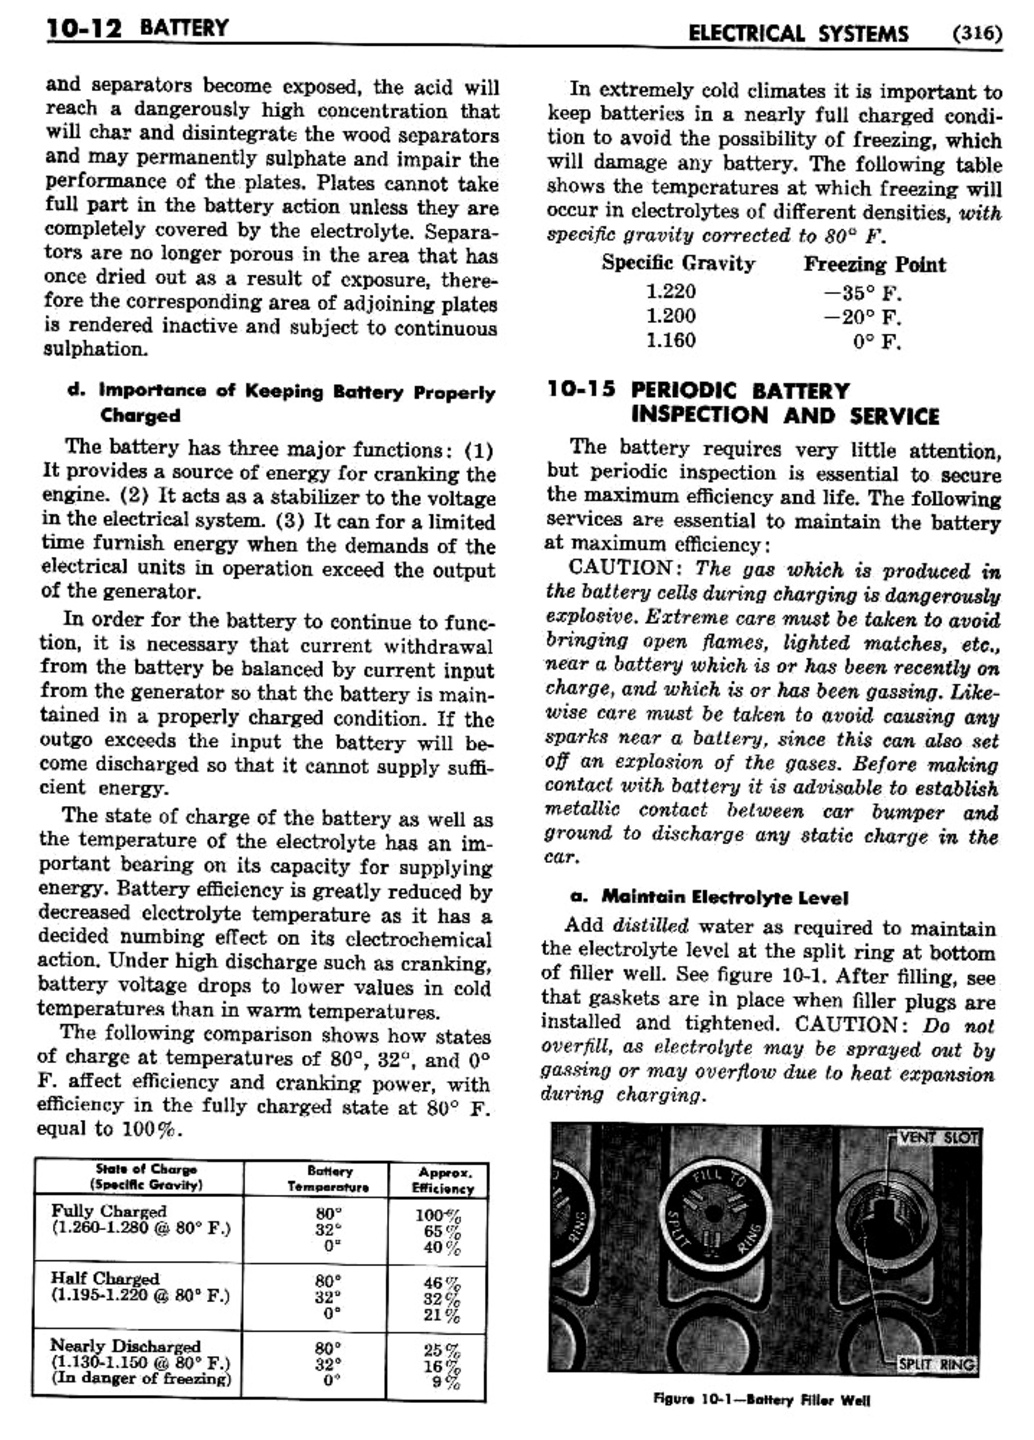 n_11 1955 Buick Shop Manual - Electrical Systems-012-012.jpg